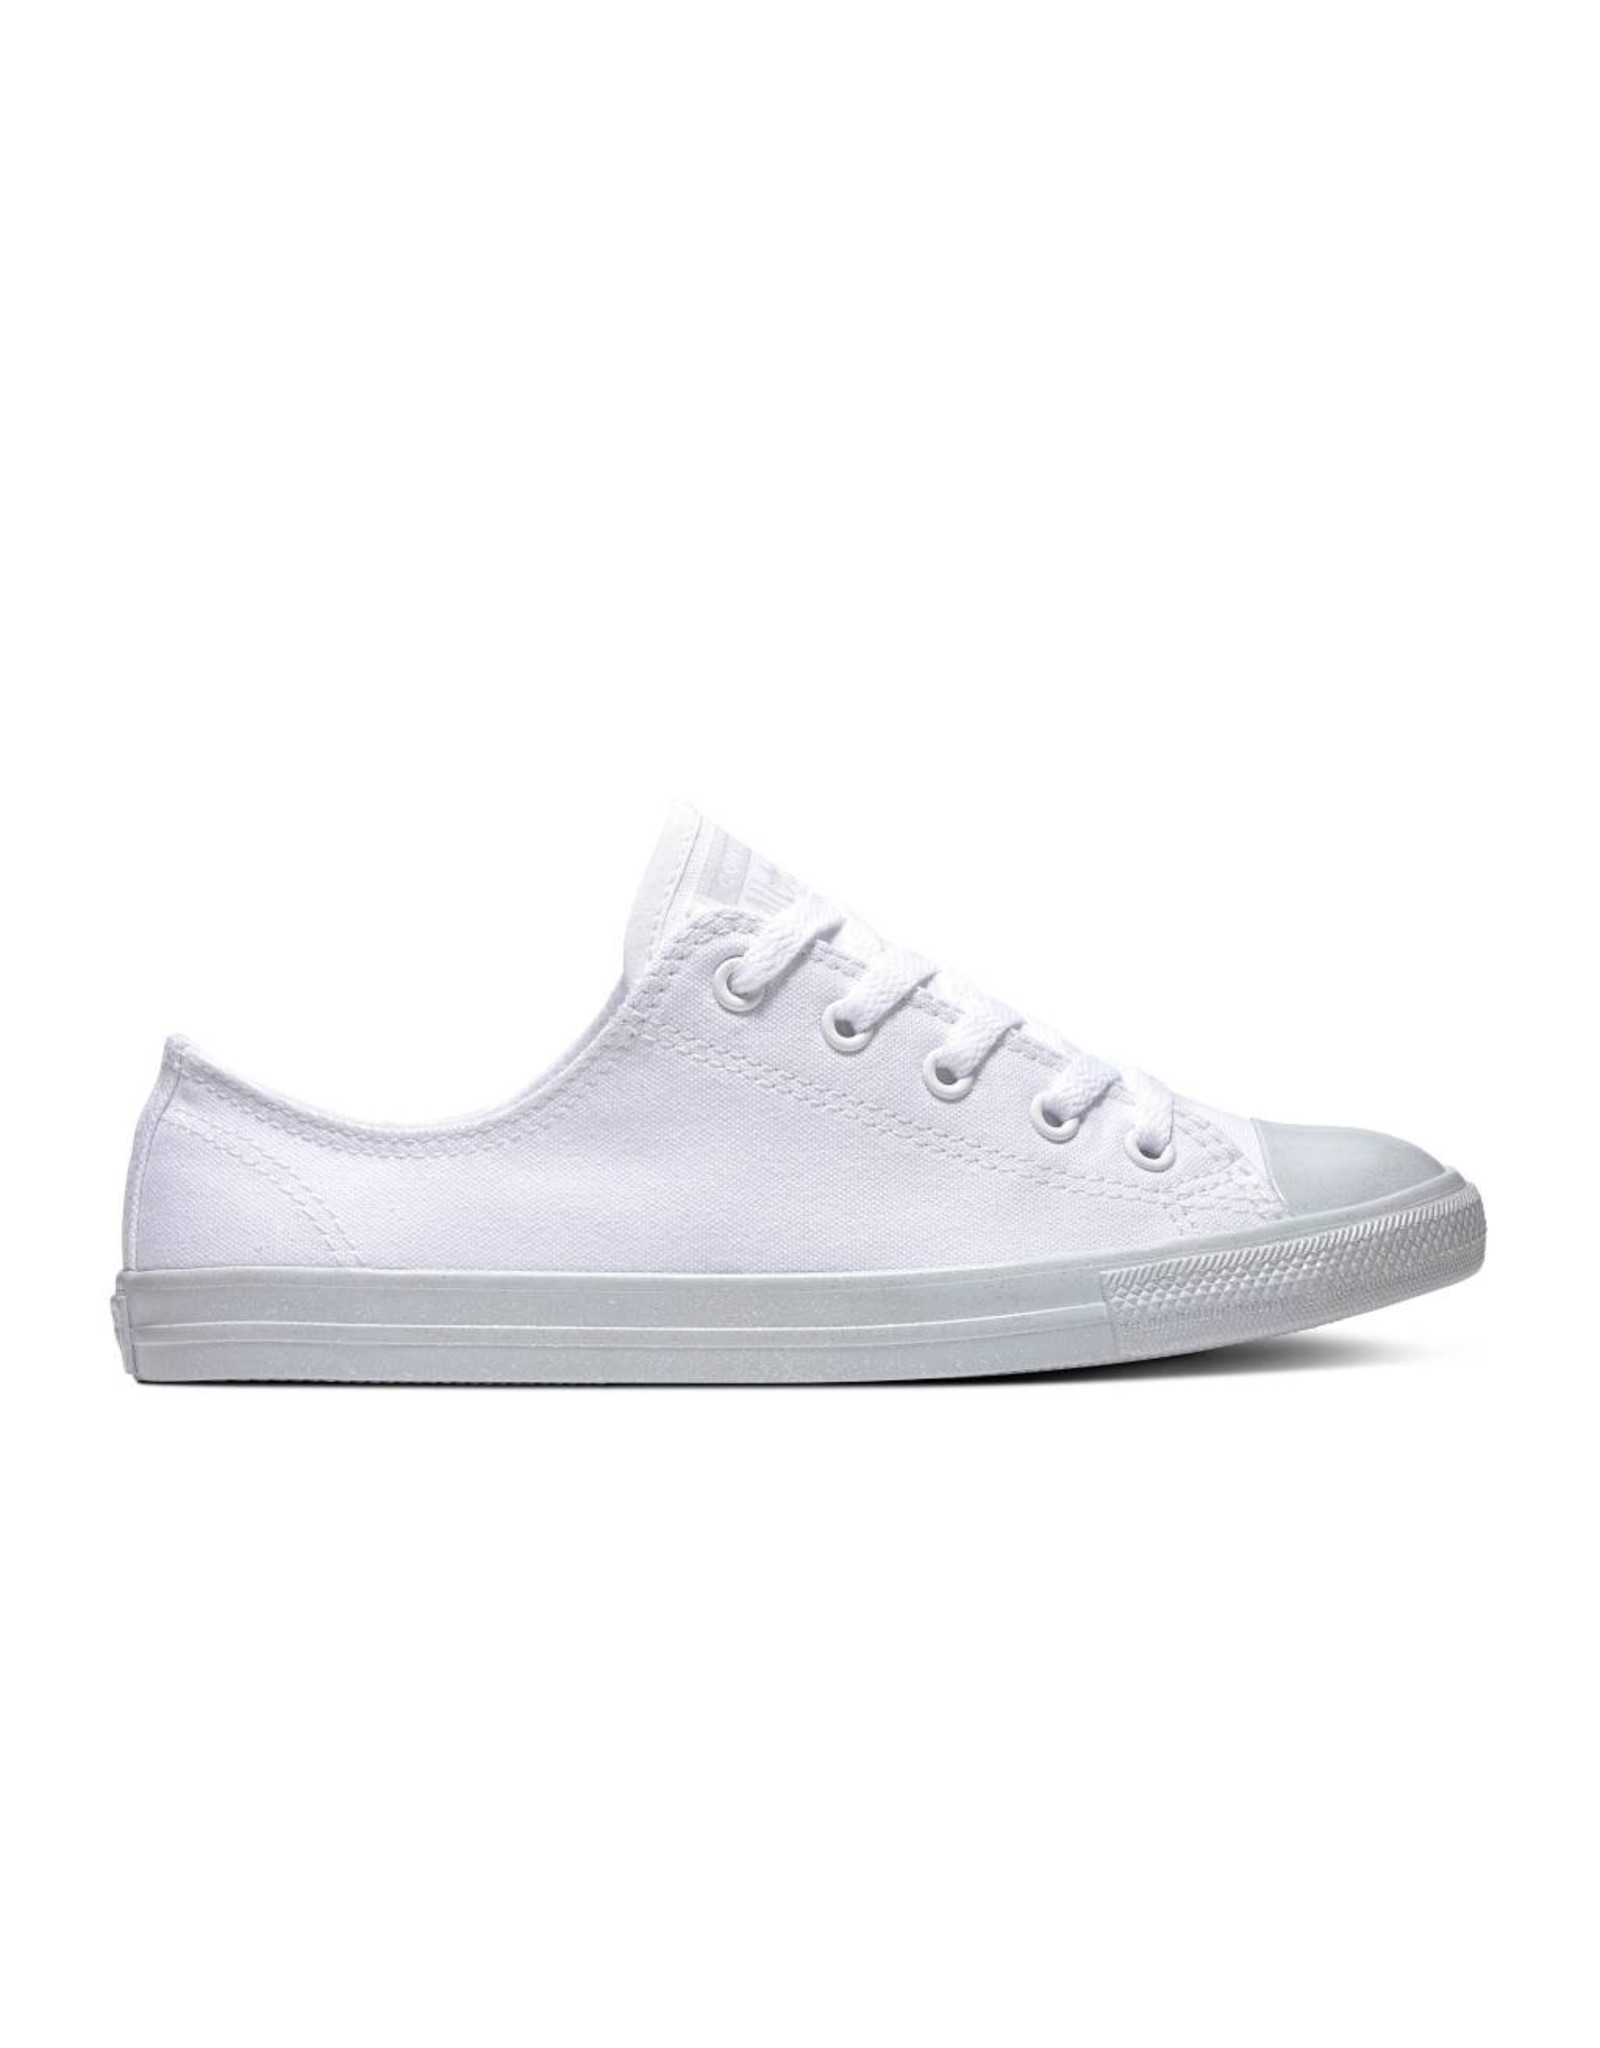 CHUCK TAYLOR ALL STAR DAINTY OX WHITE/WHITE/PURE PLATINUM C940DW-563475C